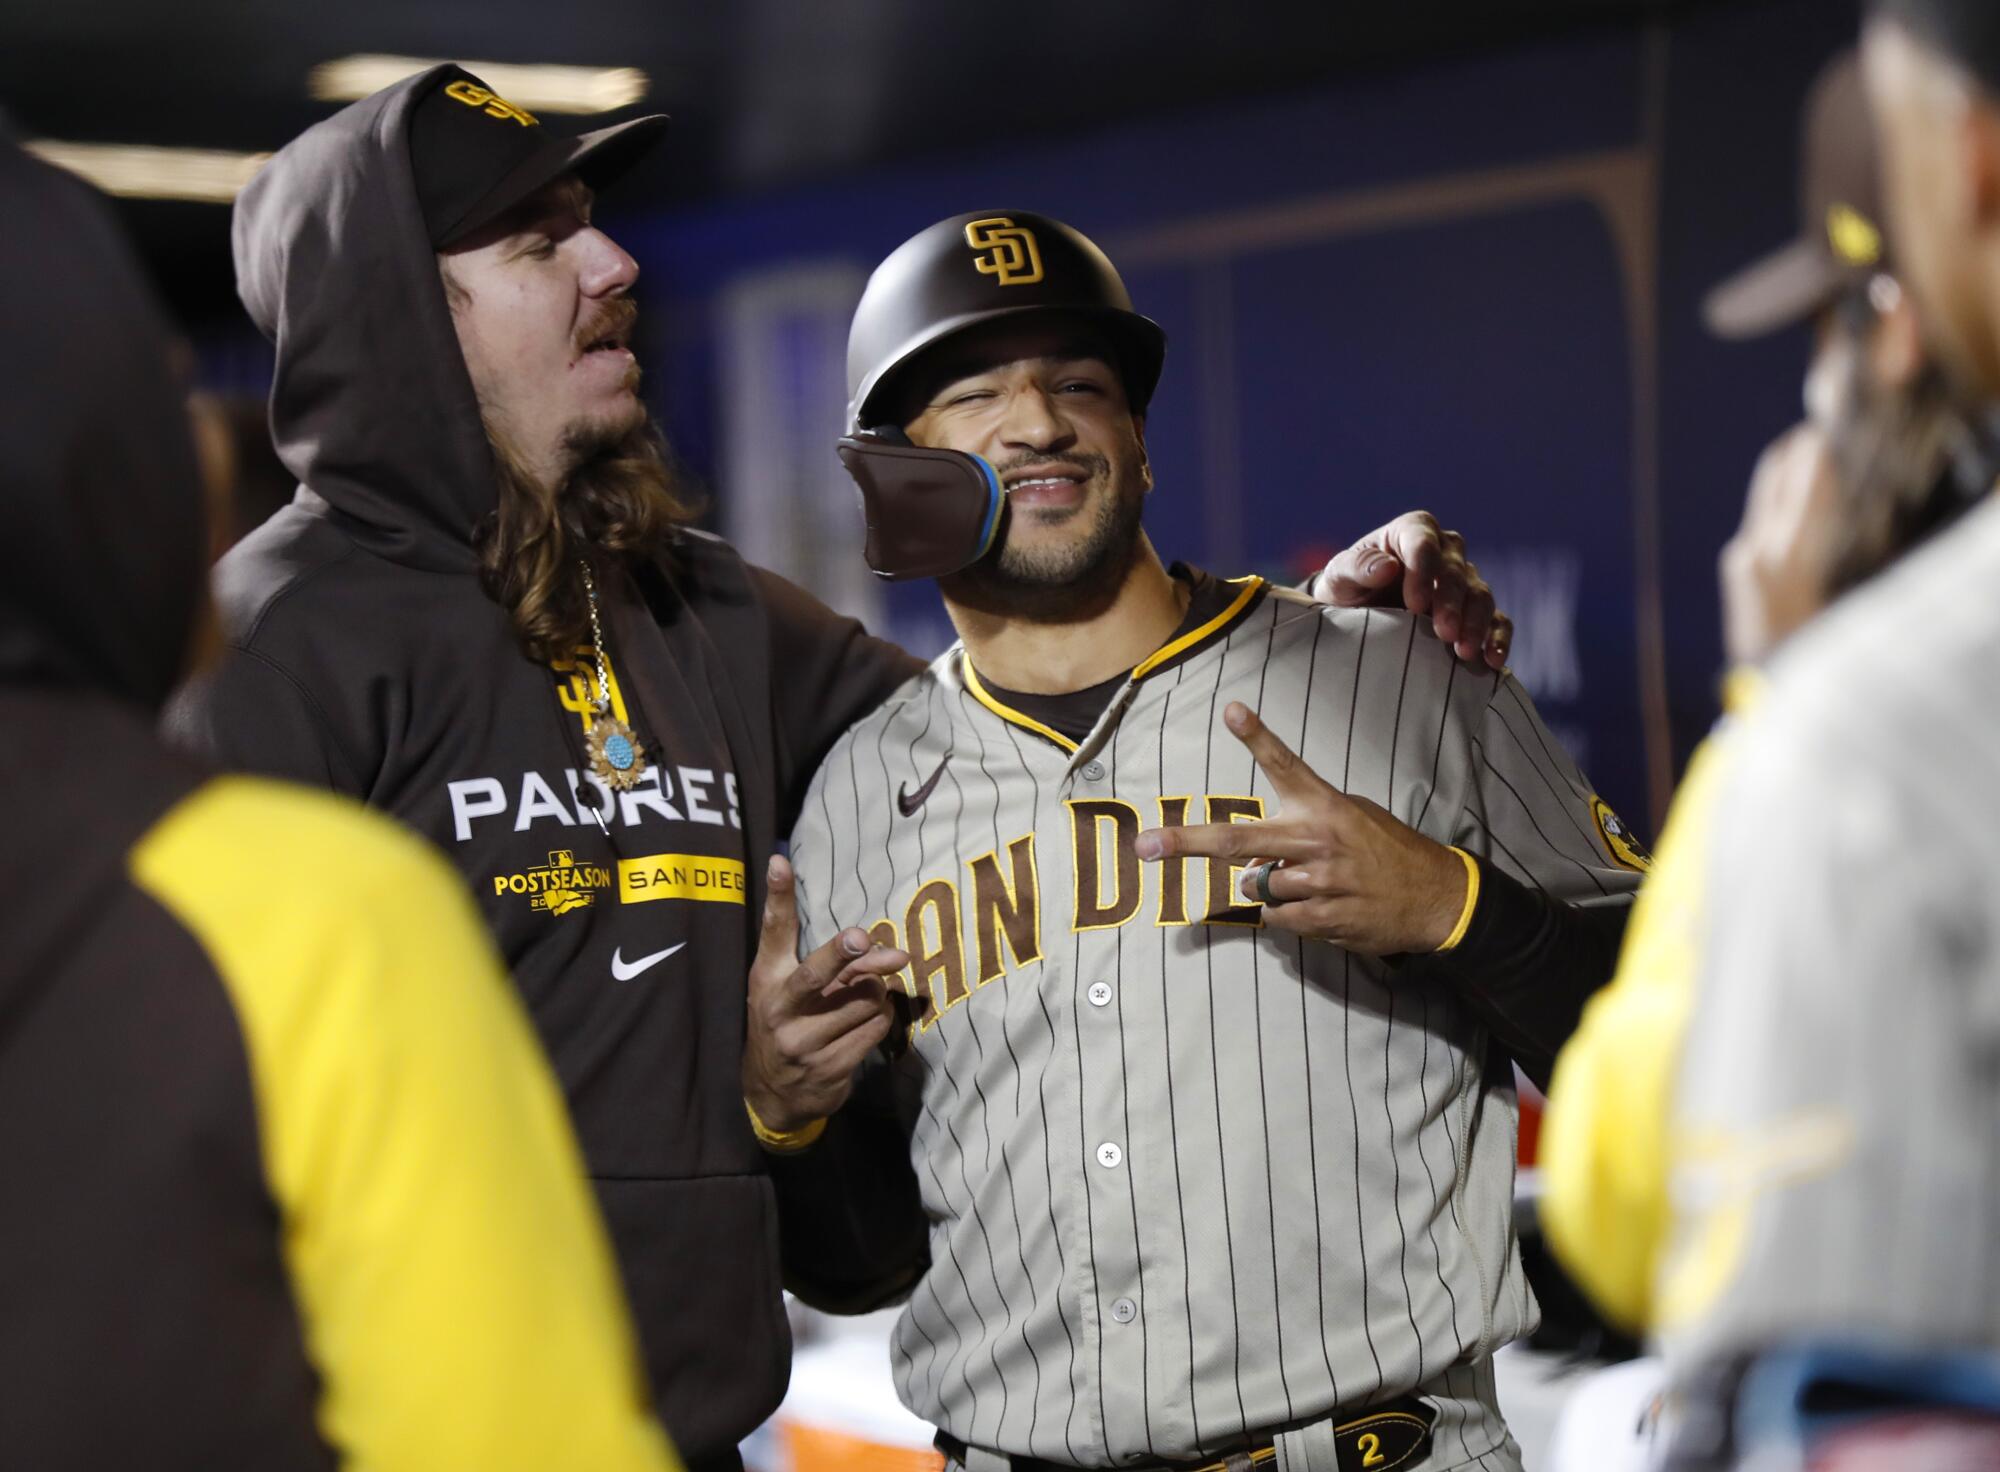 The Padres' Trent Grisham takes a photo with Mike Clevinger in the dugout after hitting a solo home run in the third inning.